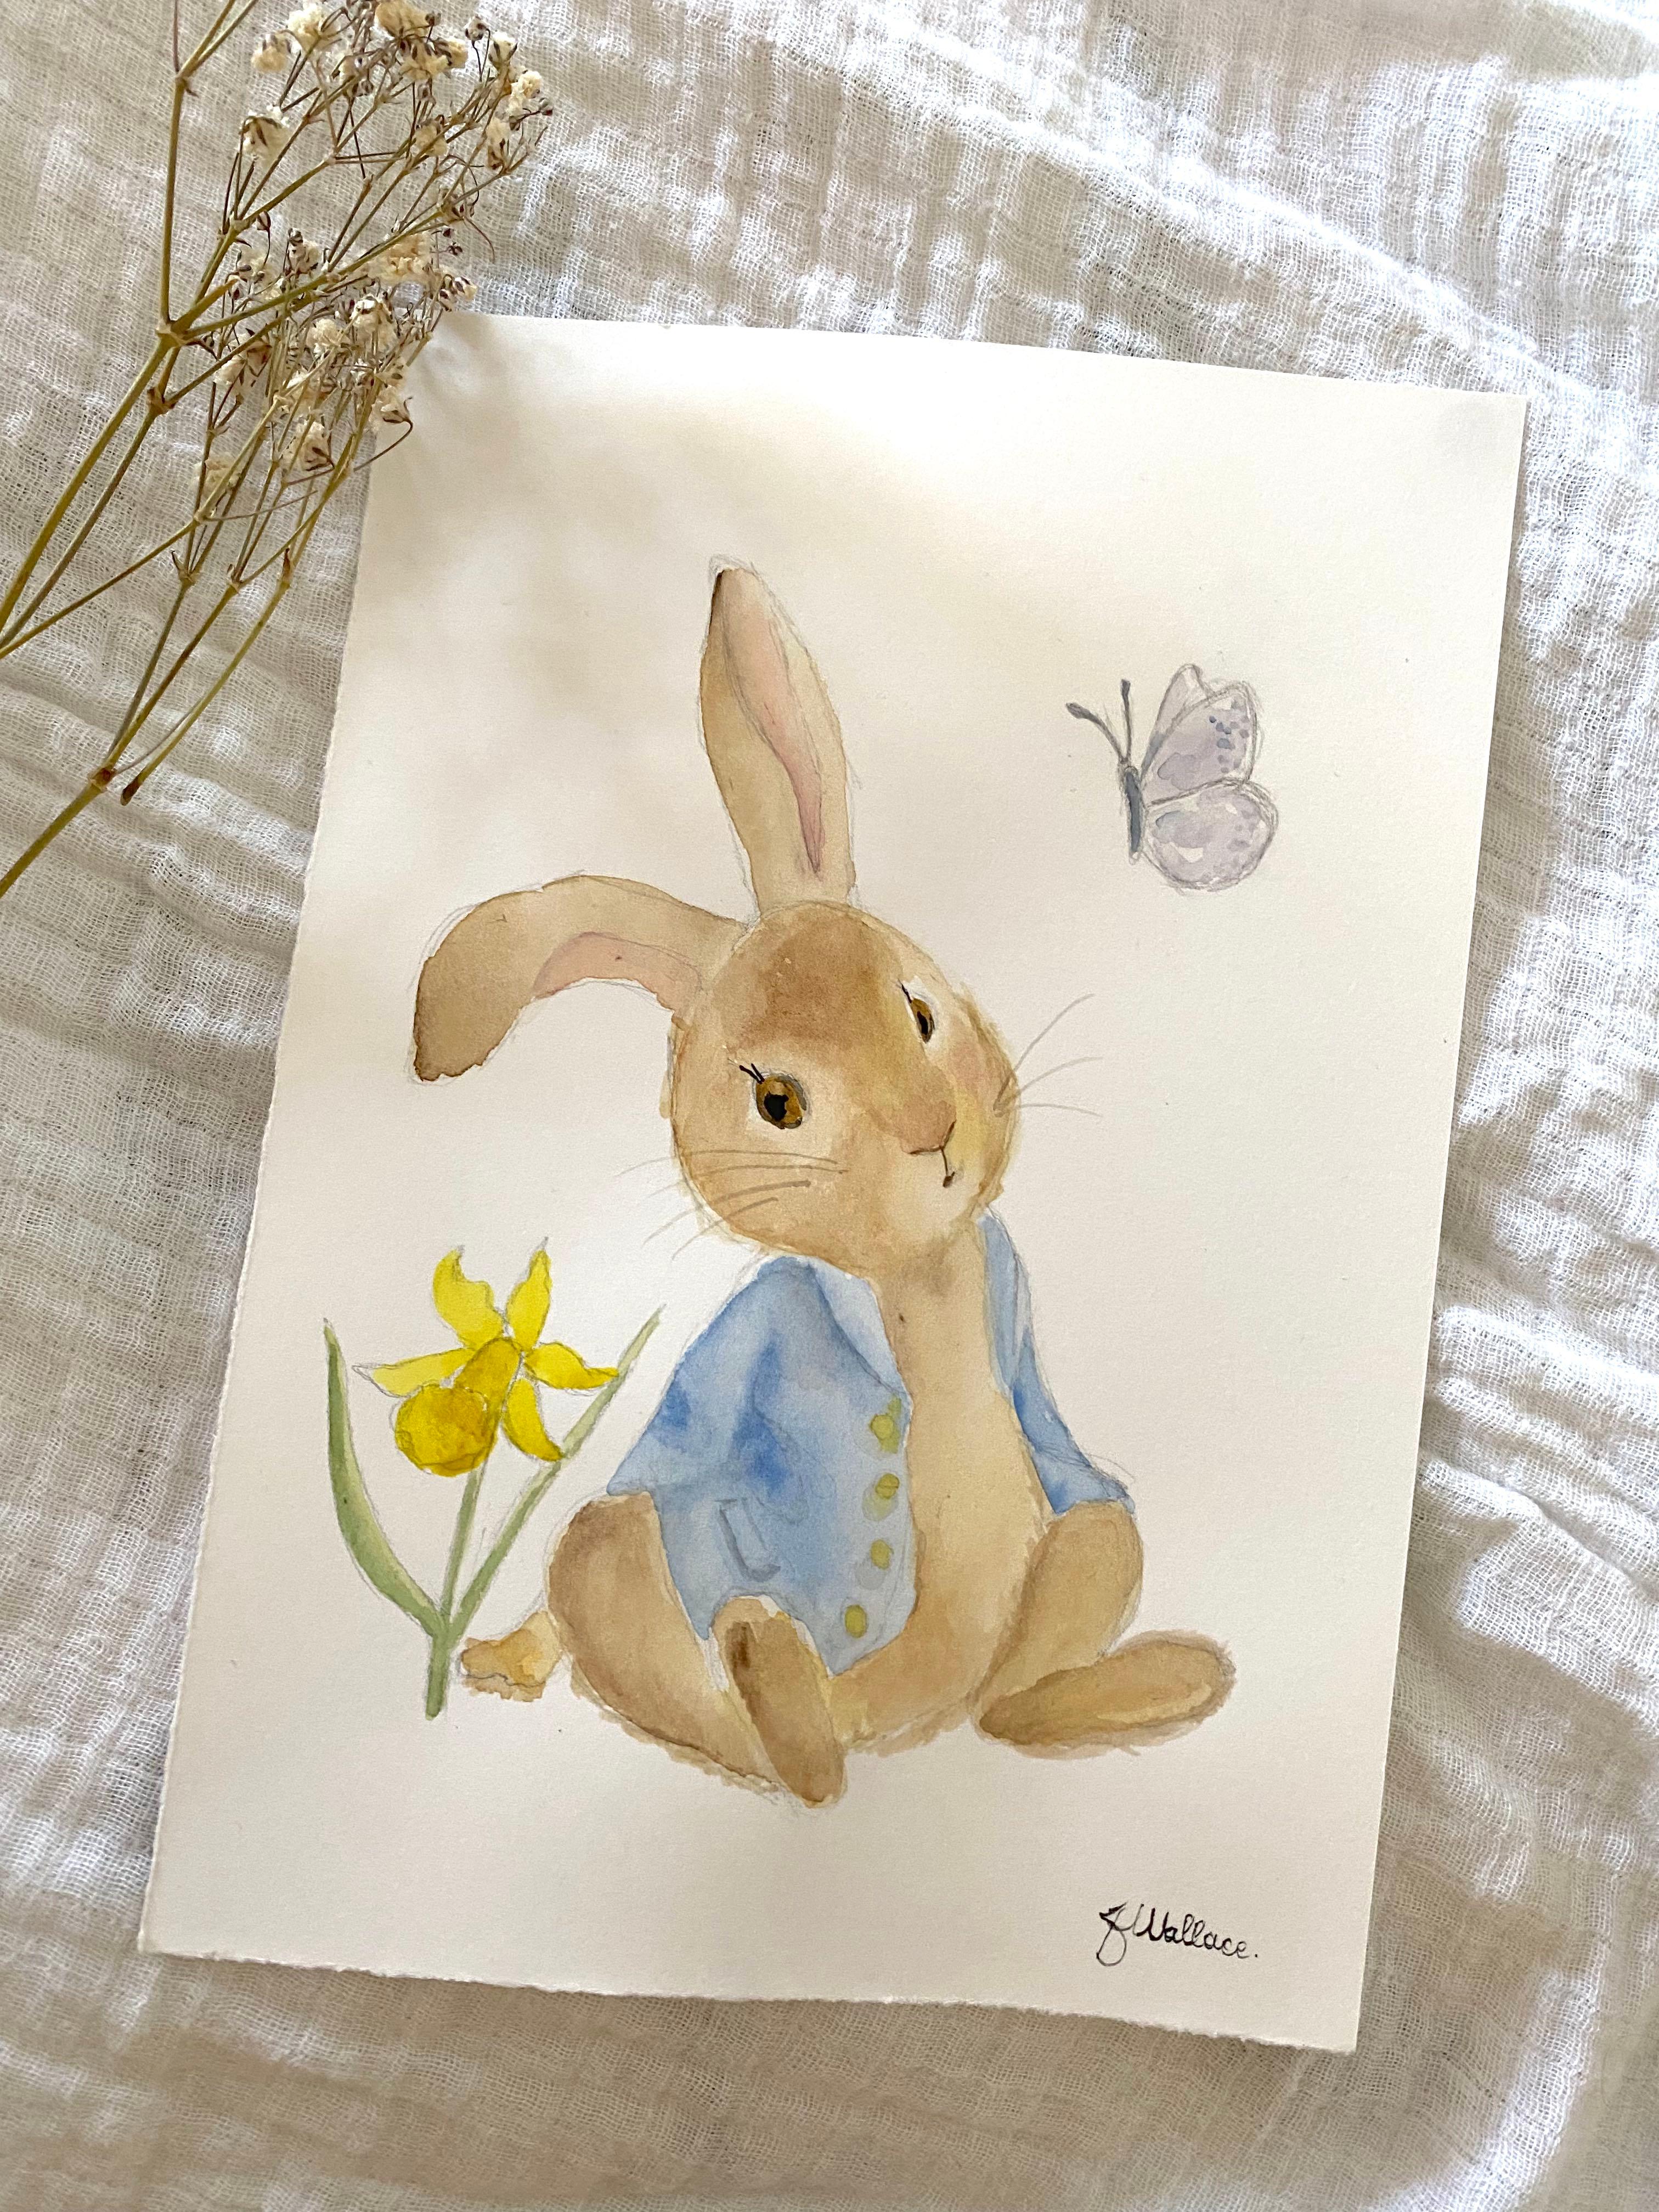 Peter Rabbit Story Original Drawing in Ink and Watercolor Painting